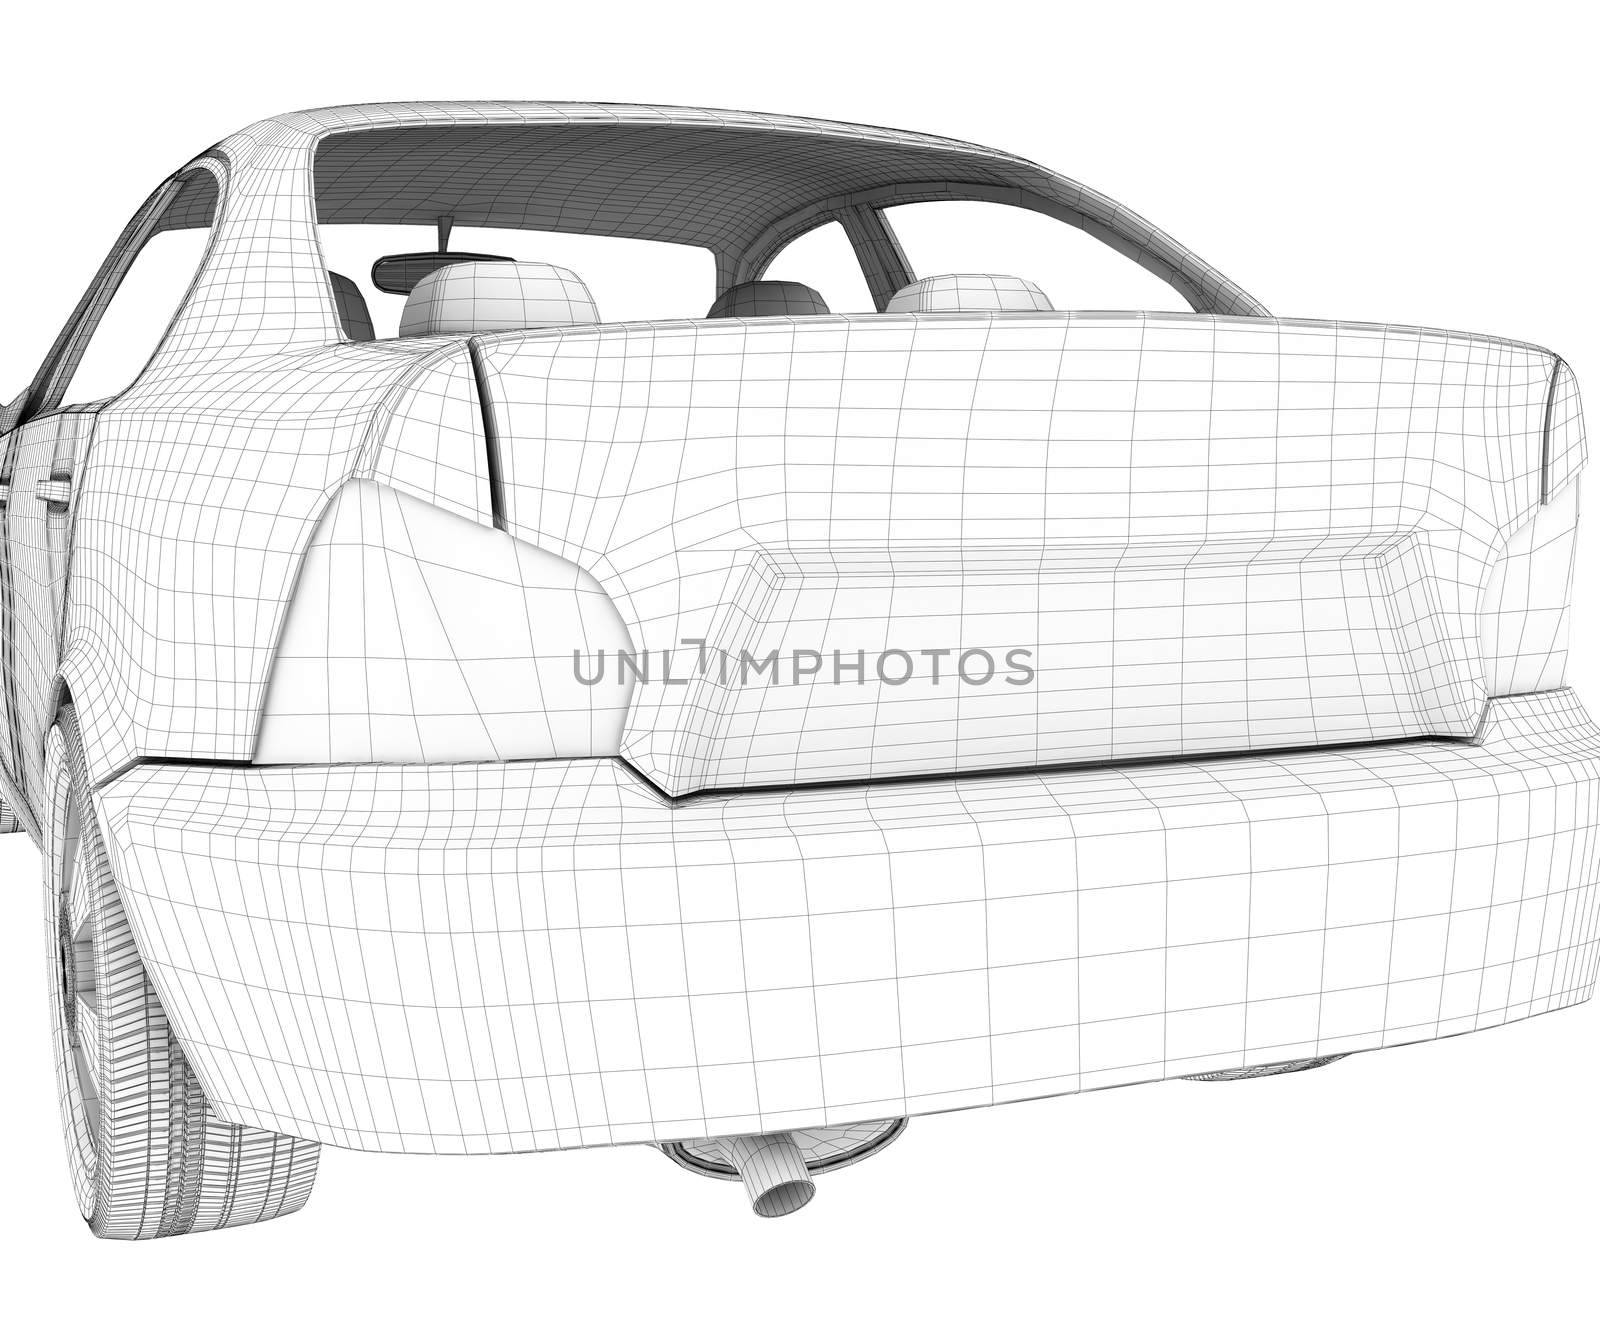 Car on isolated white background, back view